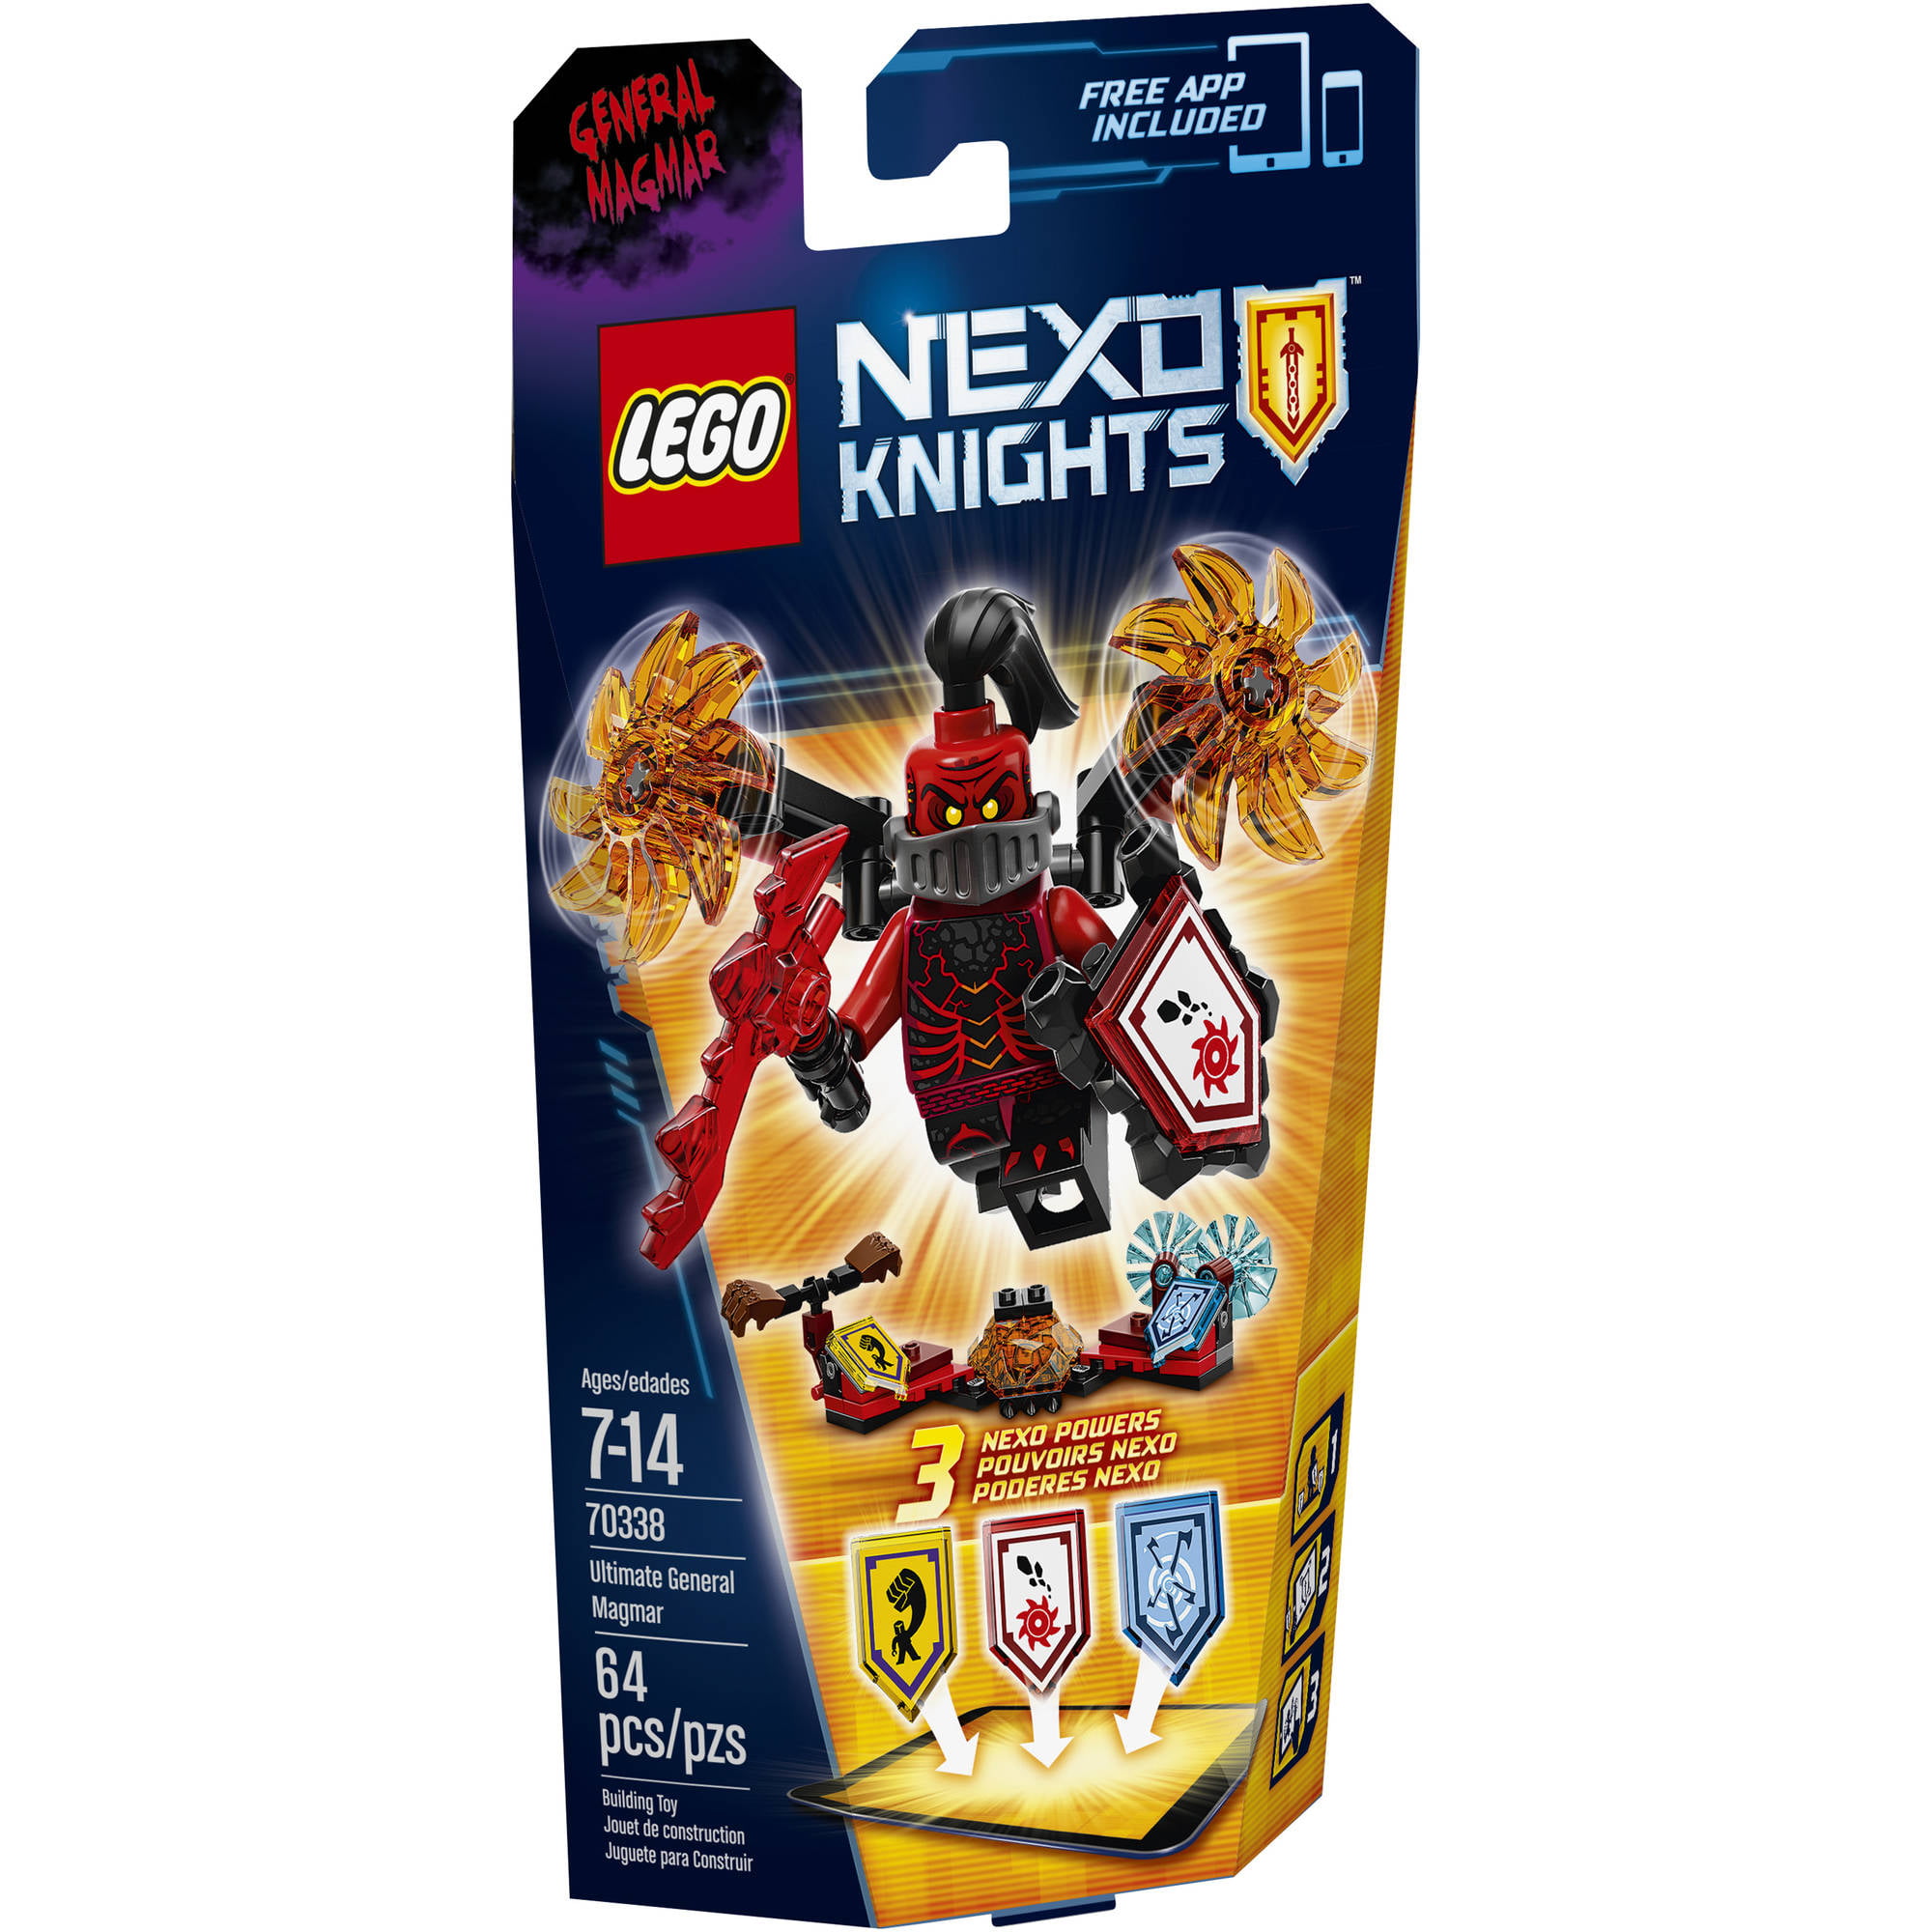 Lego nexo knights ™ trading card game limited limited edition choose 